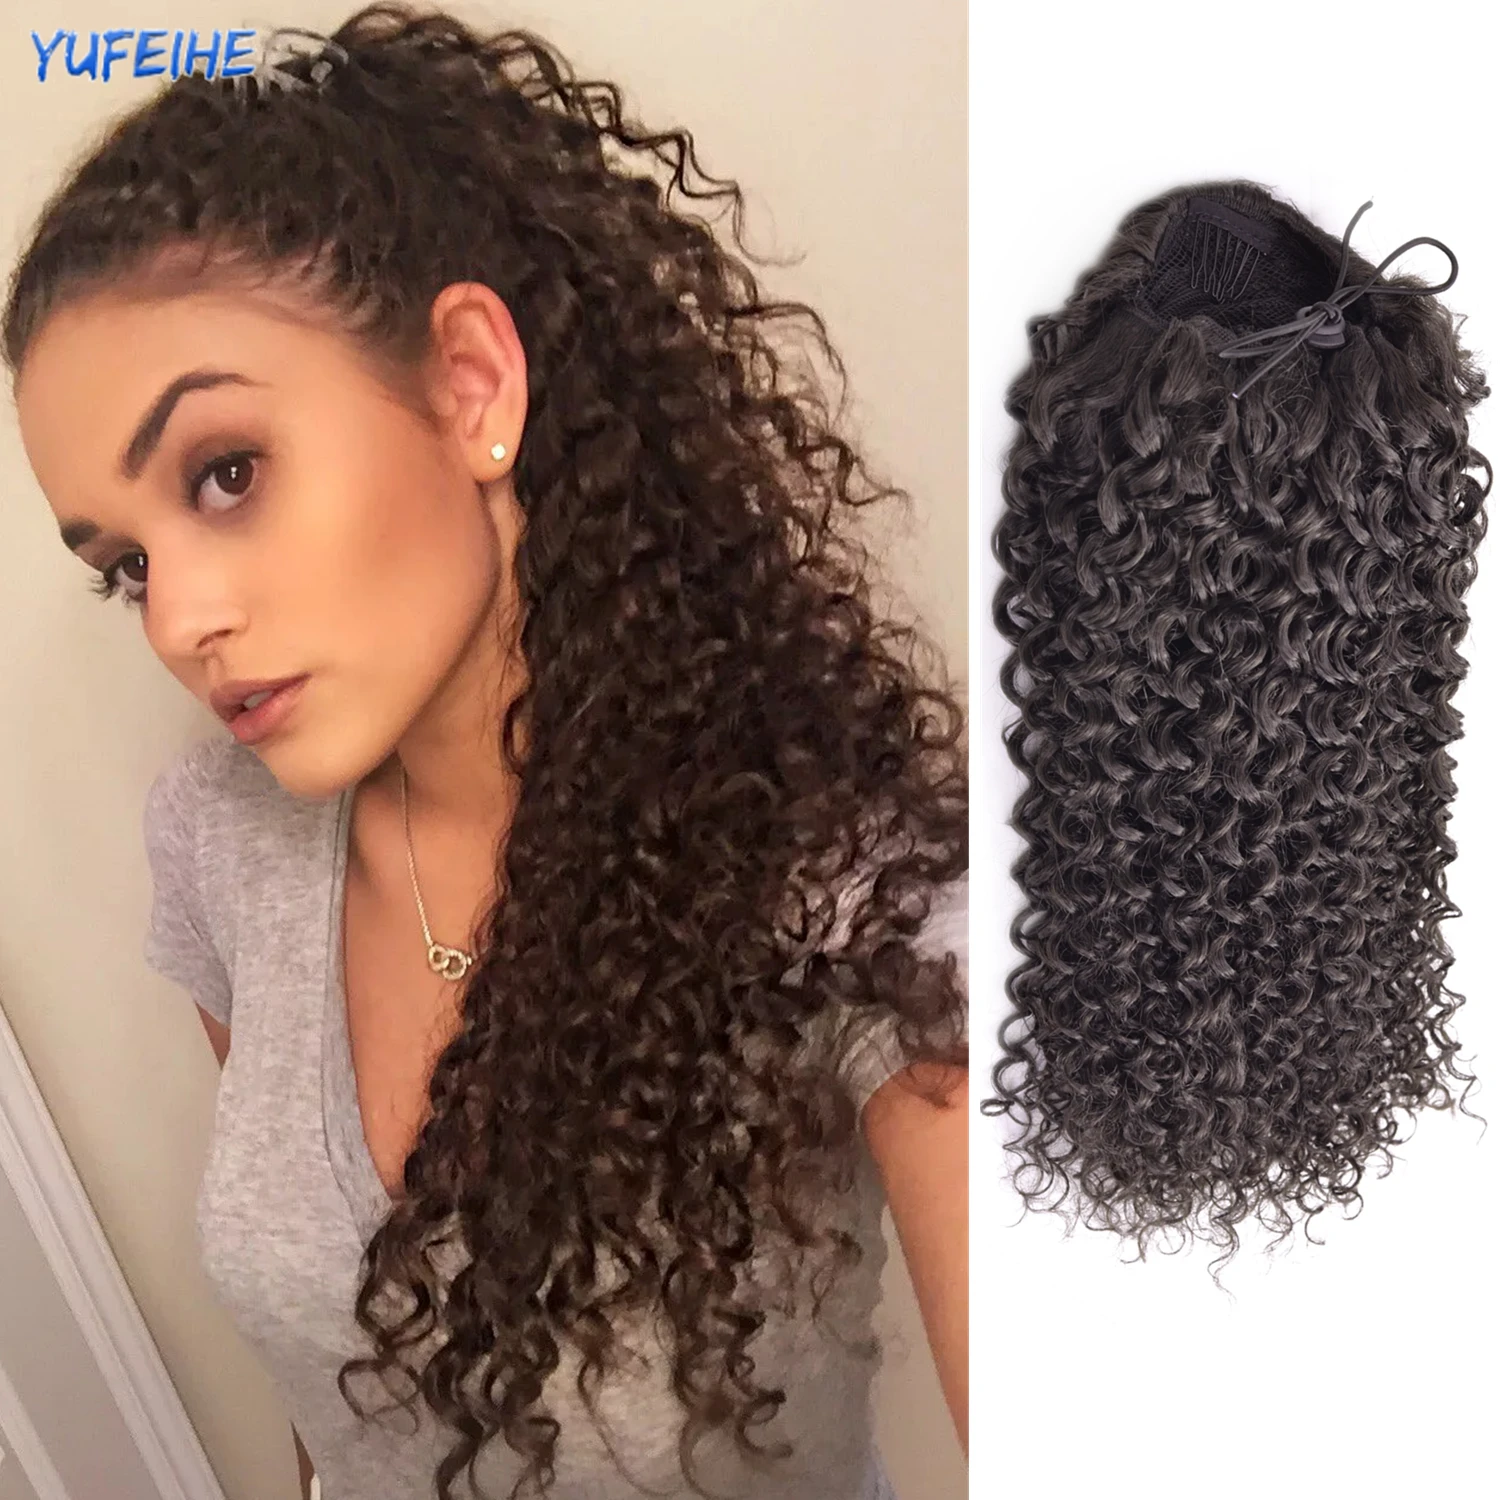 Synthetic Clip In Ponytail Hair Extensions Curly Long Drawstring Fake Pony Tail Blonde False Afro Hairpiece Brazilian For Women